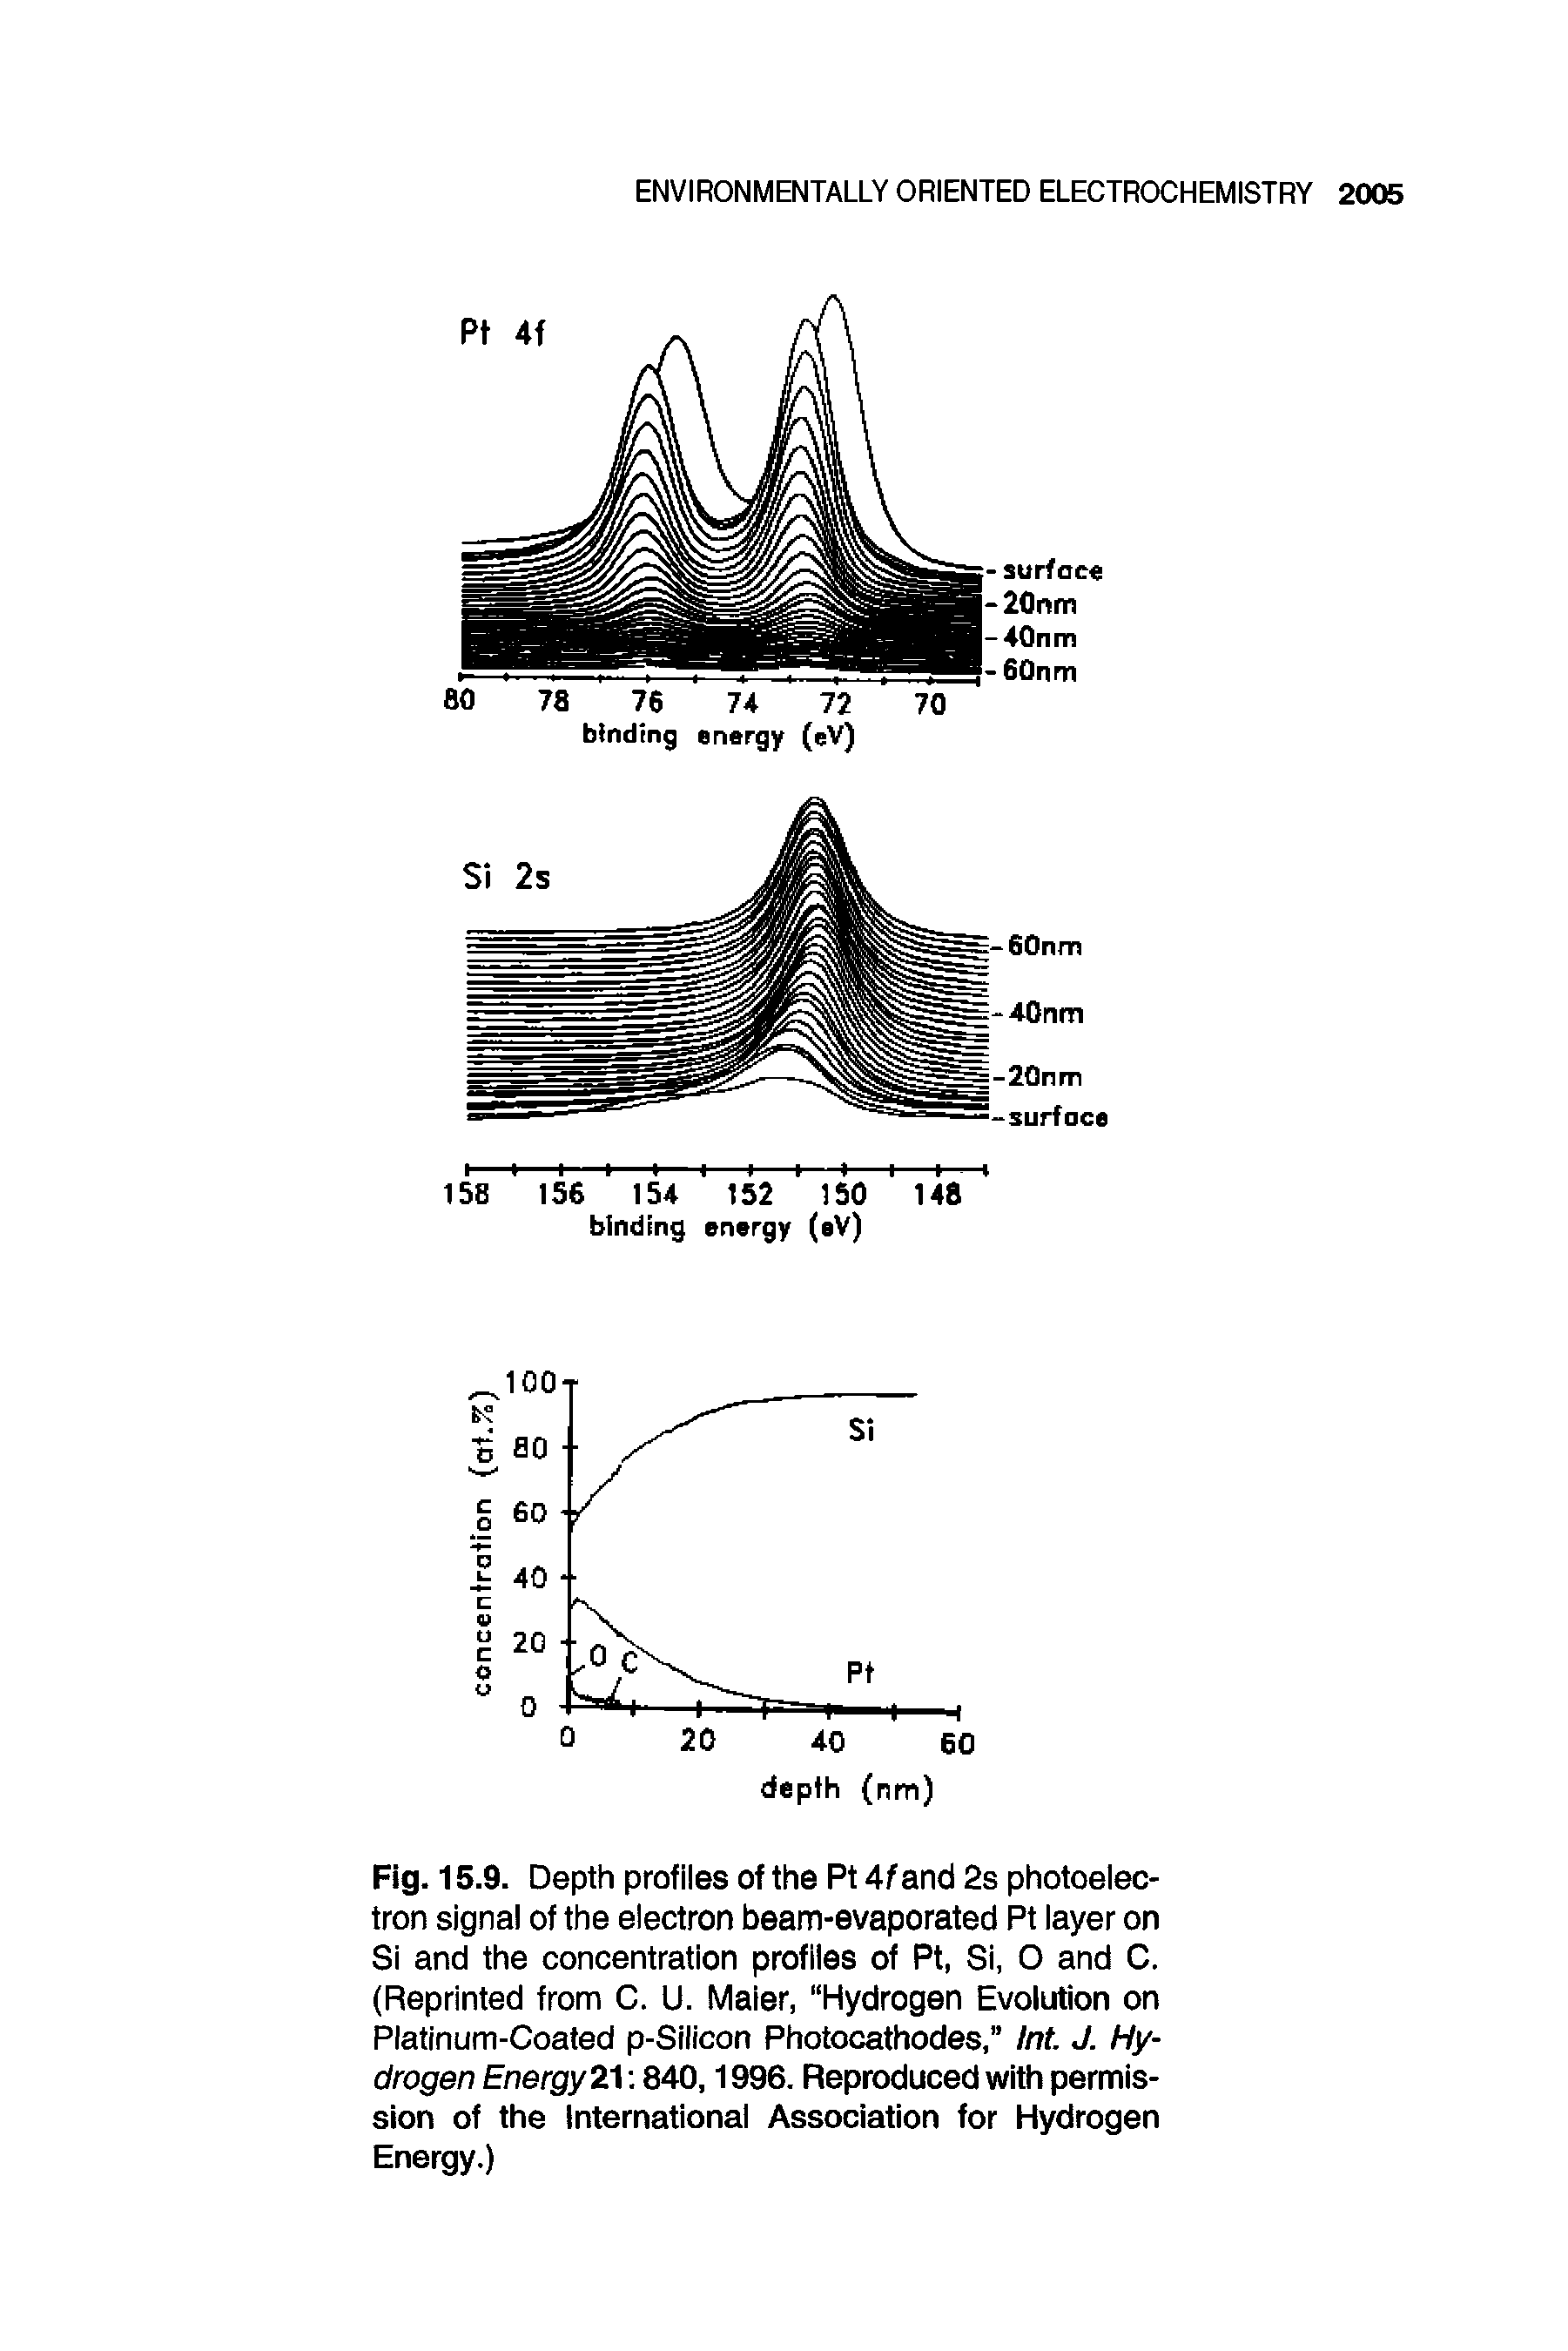 Fig. 15.9. Depth profiles of the Pt Af and 2s photoelectron signal of the electron beam-evaporated Pt layer on Si and the concentration profiles of Pt, Si, O and C. (Reprinted from C. U. Maier, Hydrogen Evolution on Platinum-Coated p-Silicon Photocathodes, Int. J. Hydrogen Energy21 840,1996. Reproduced with permission of the International Association for Hydrogen Energy.)...